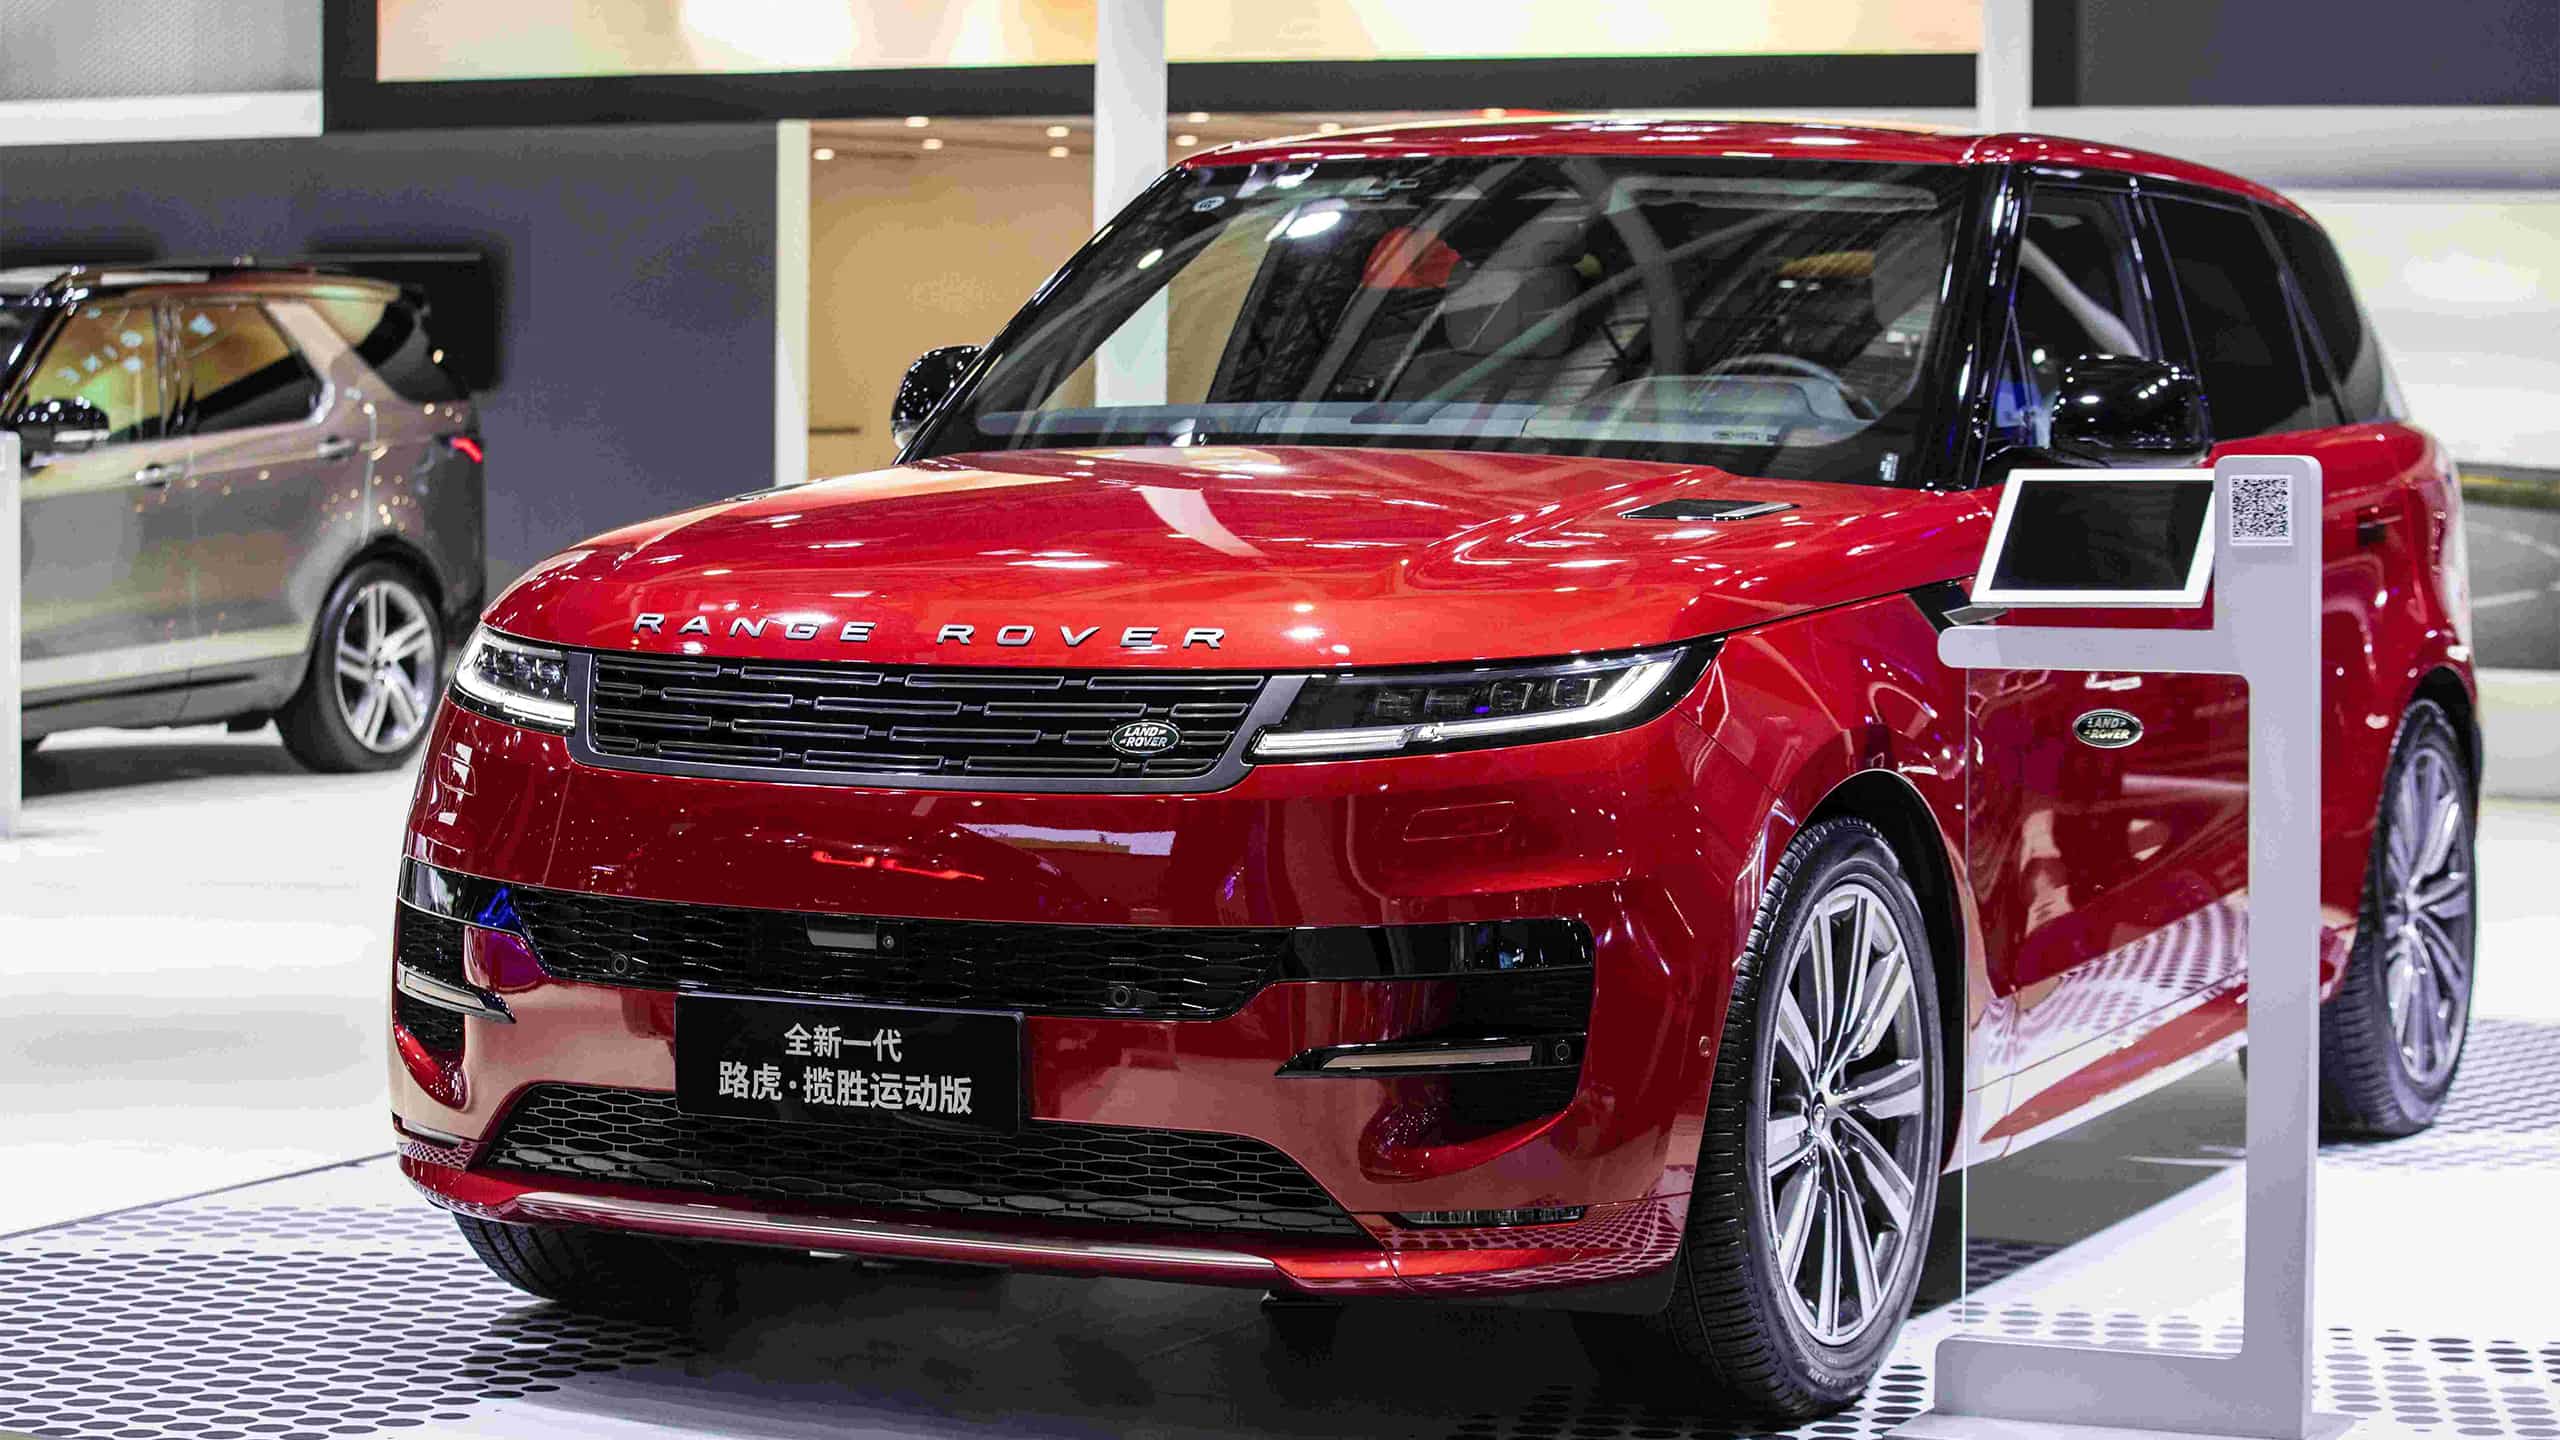 New Generation Range Rover Sport in the Auto Expo